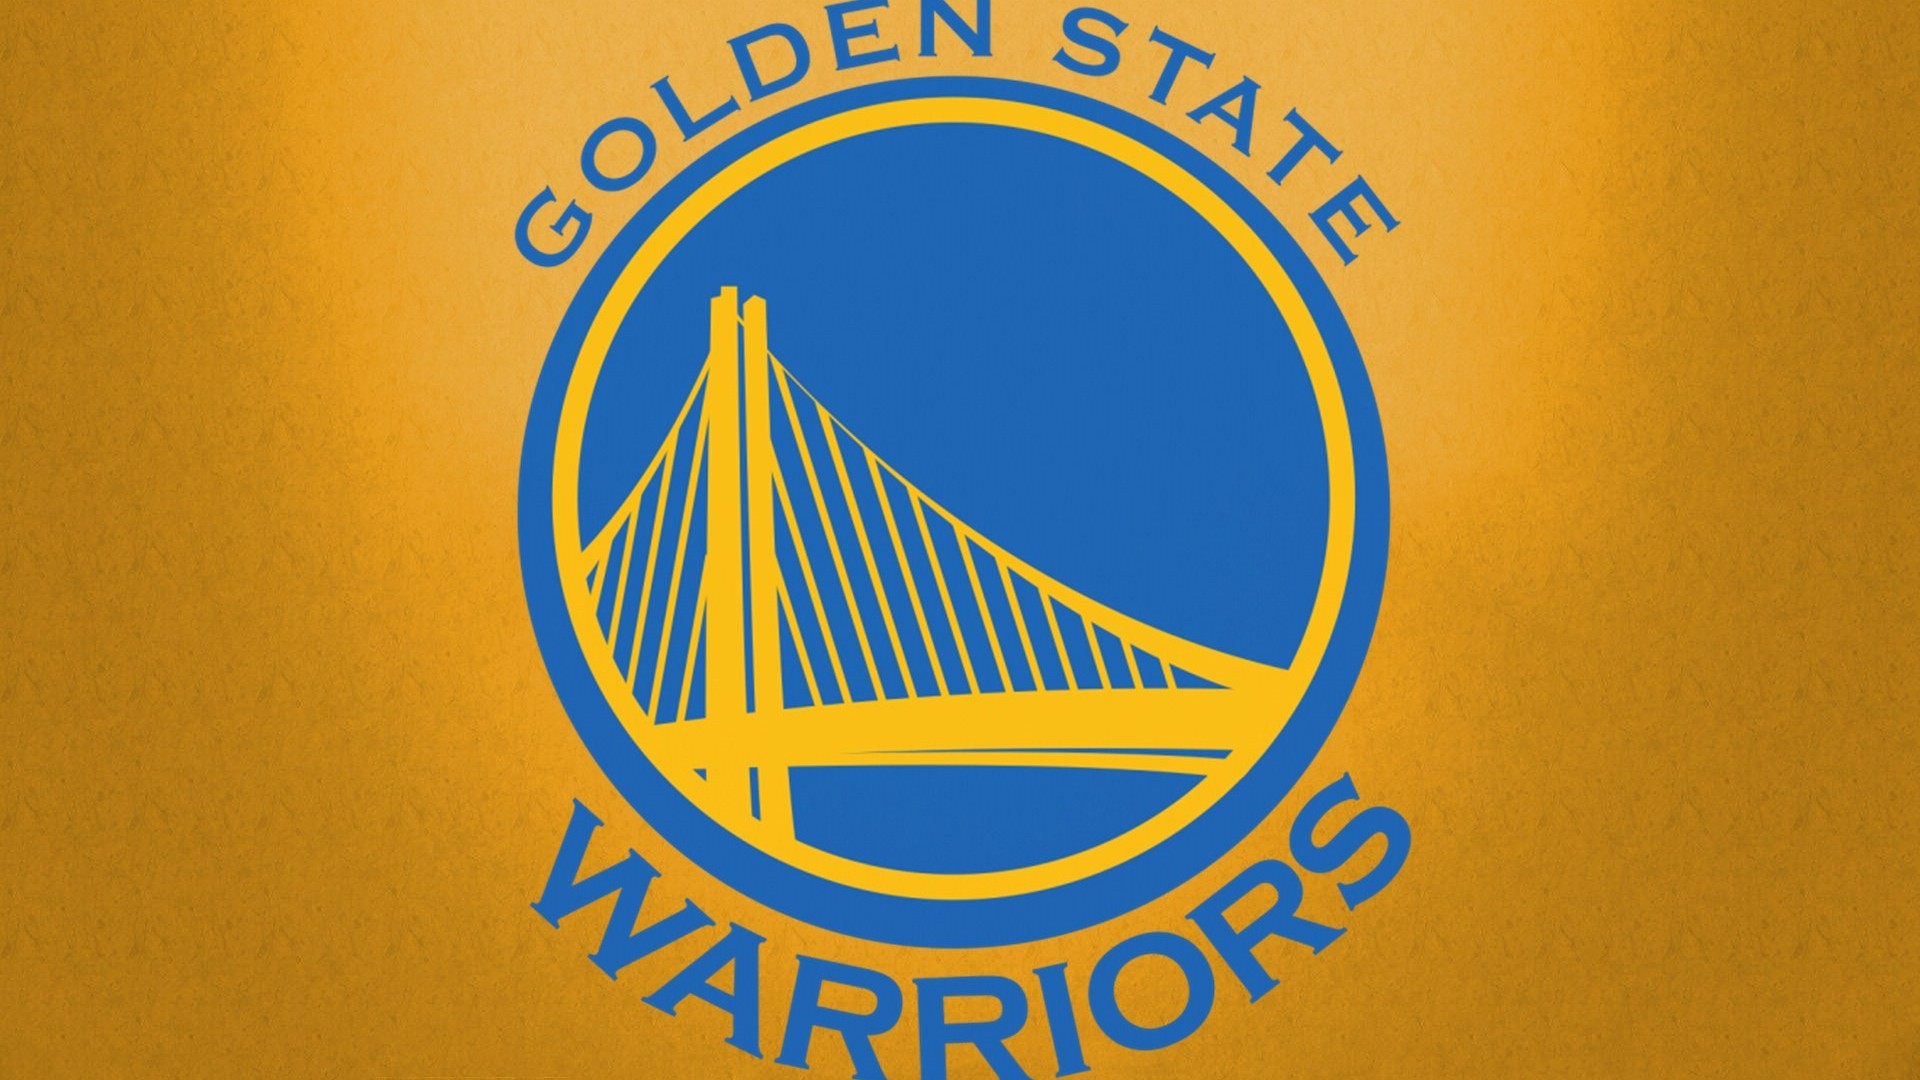 Golden State Warriors Wallpaper Pics Pictures Image Photos